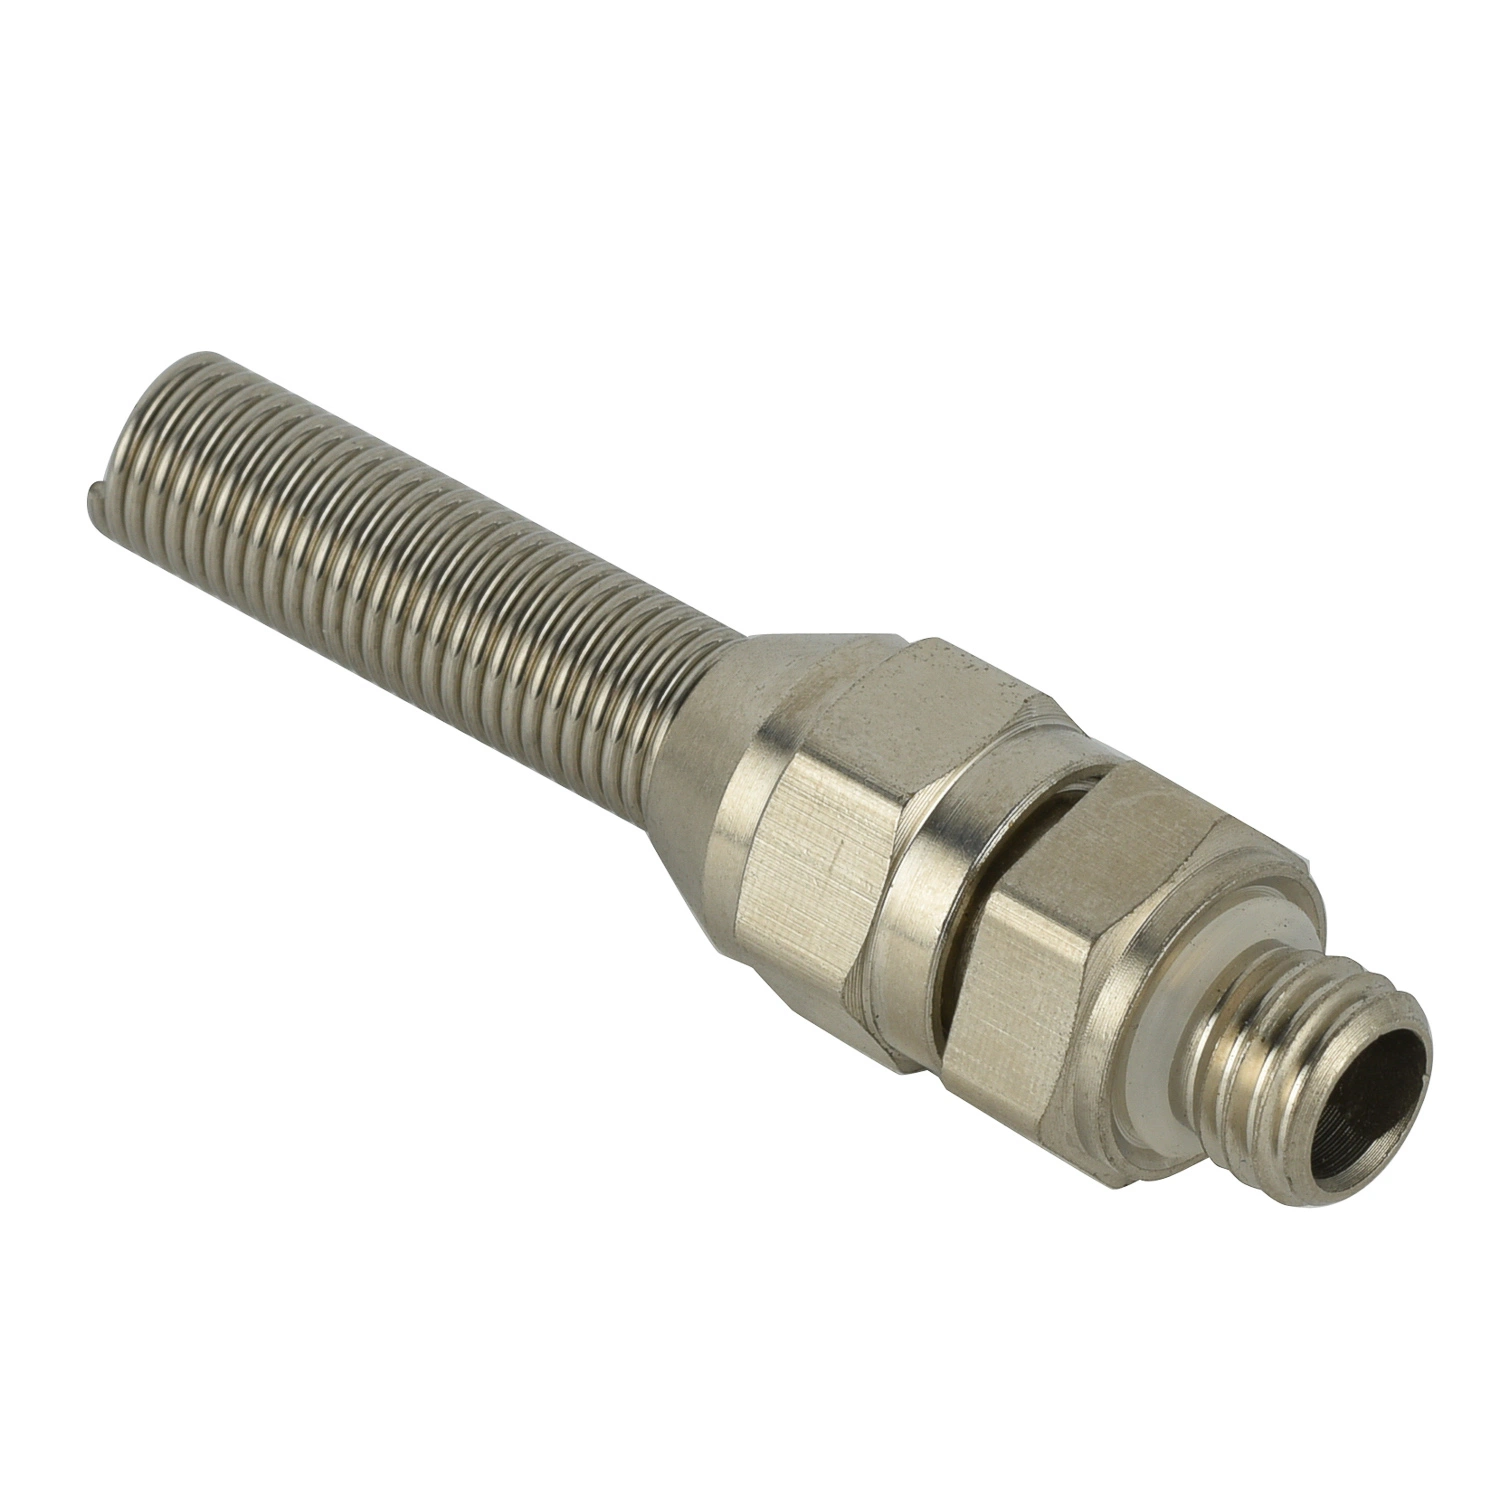 IP68 Brass Cable Glands with Strain Relief M8*1.25